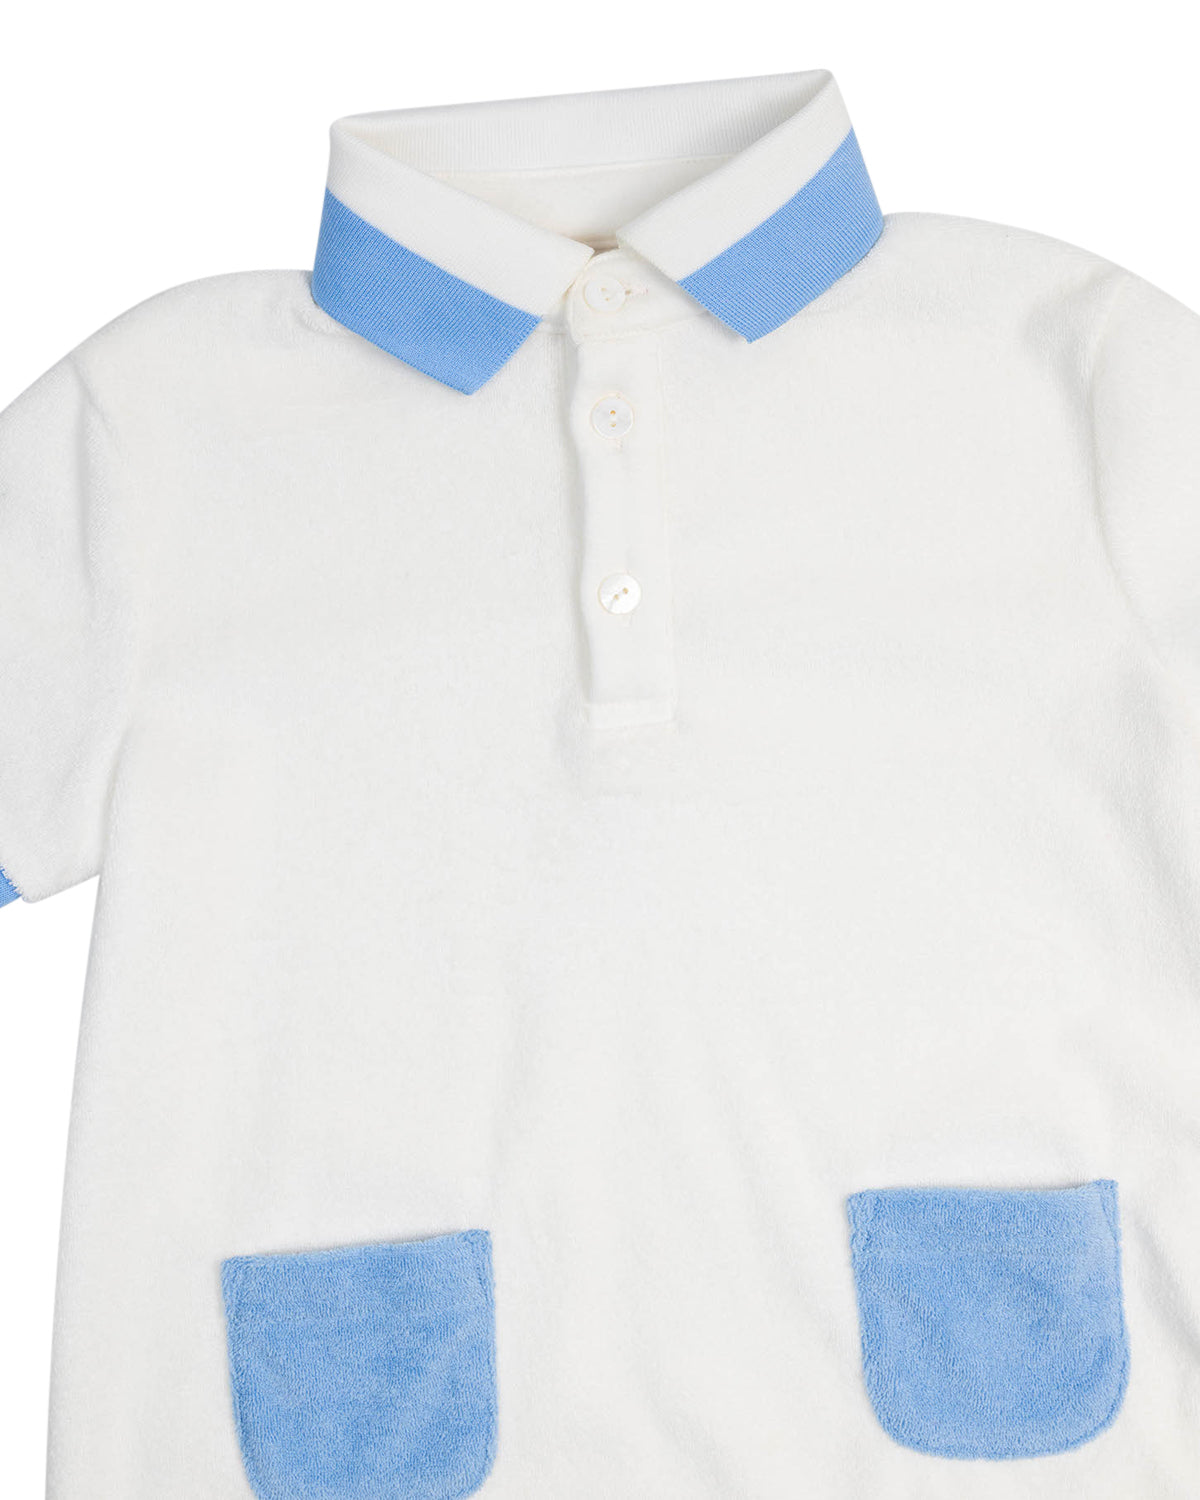 White Terry Shortall with Blue Trim